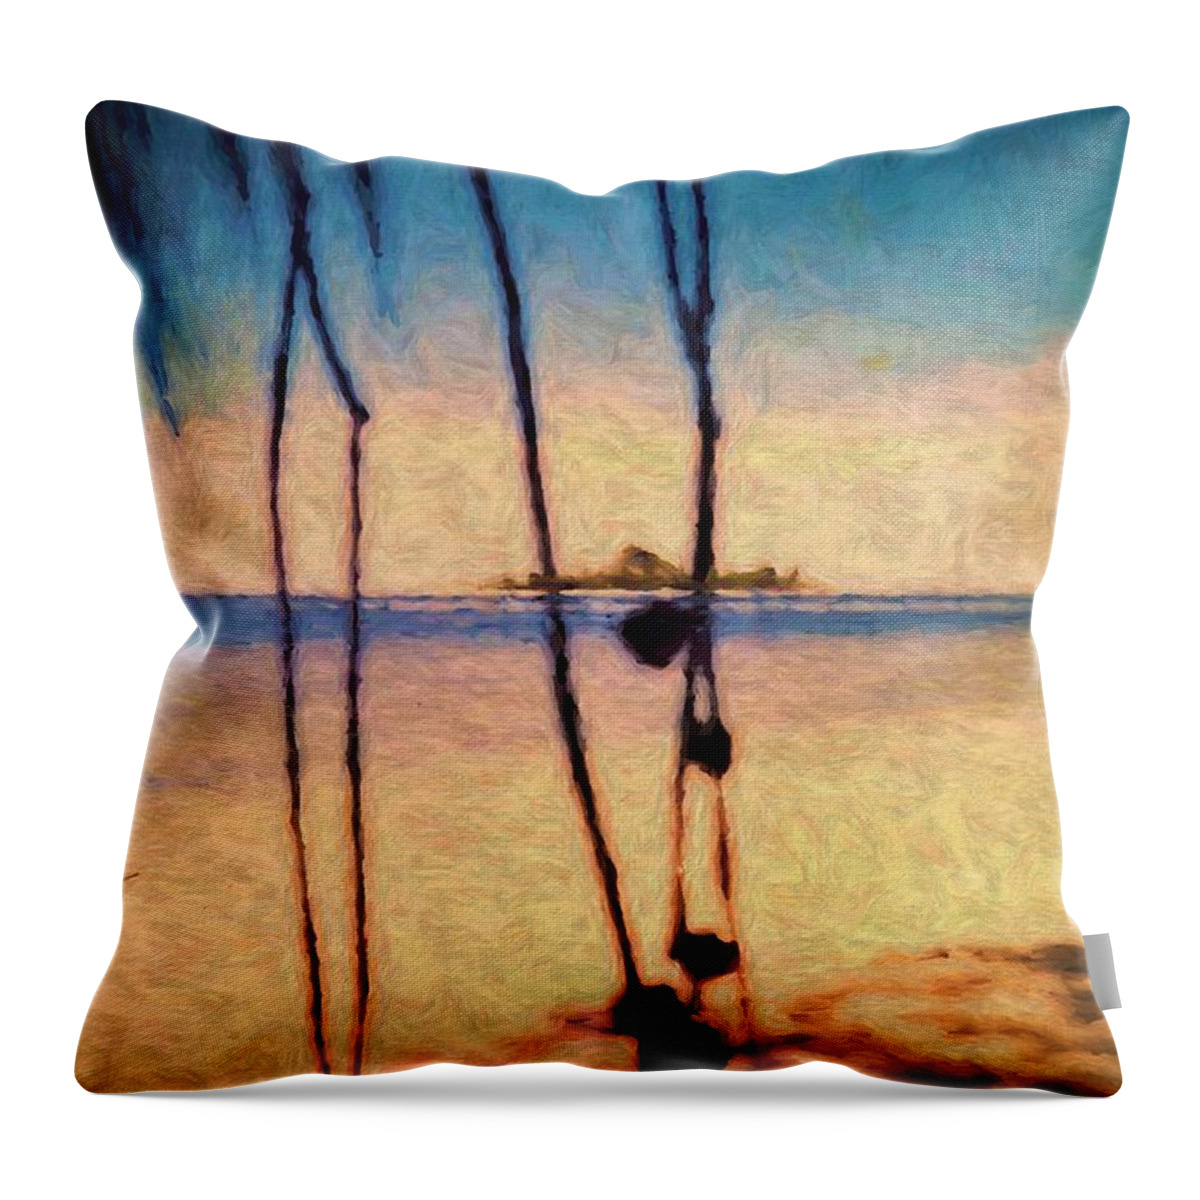 Beach View Throw Pillow featuring the mixed media Beach And Island View Near Gizo Solomon Islands by Joan Stratton